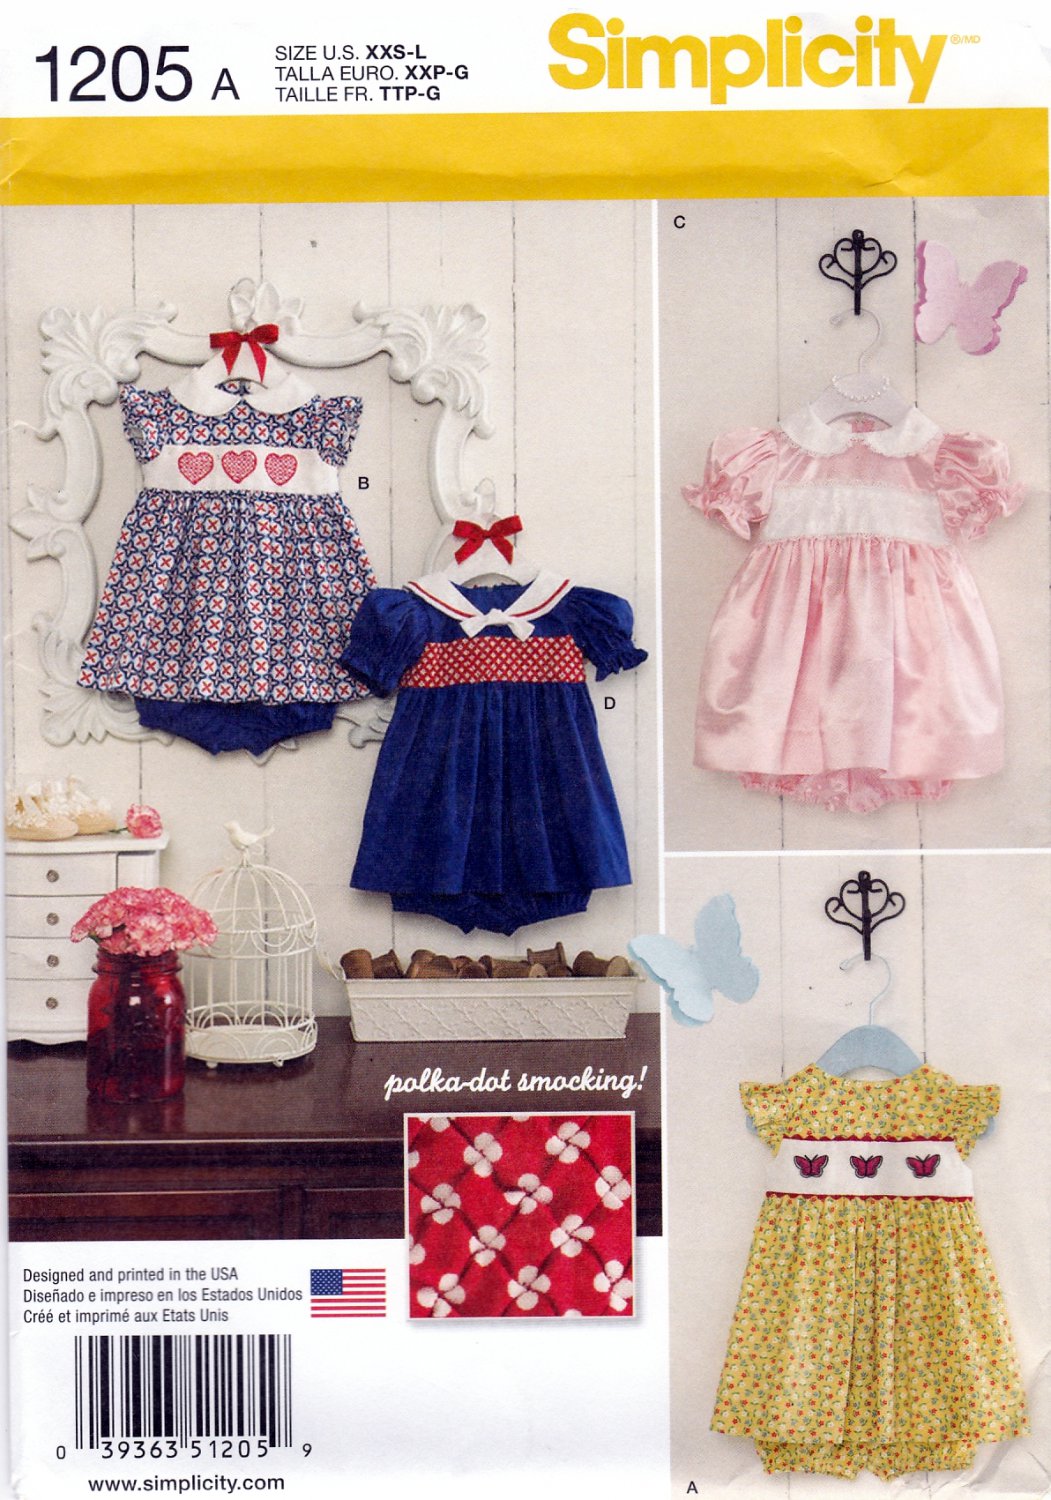 Simplicity 1205 Baby Girl Dress and Panties Sewing Pattern Sizes XXS-L